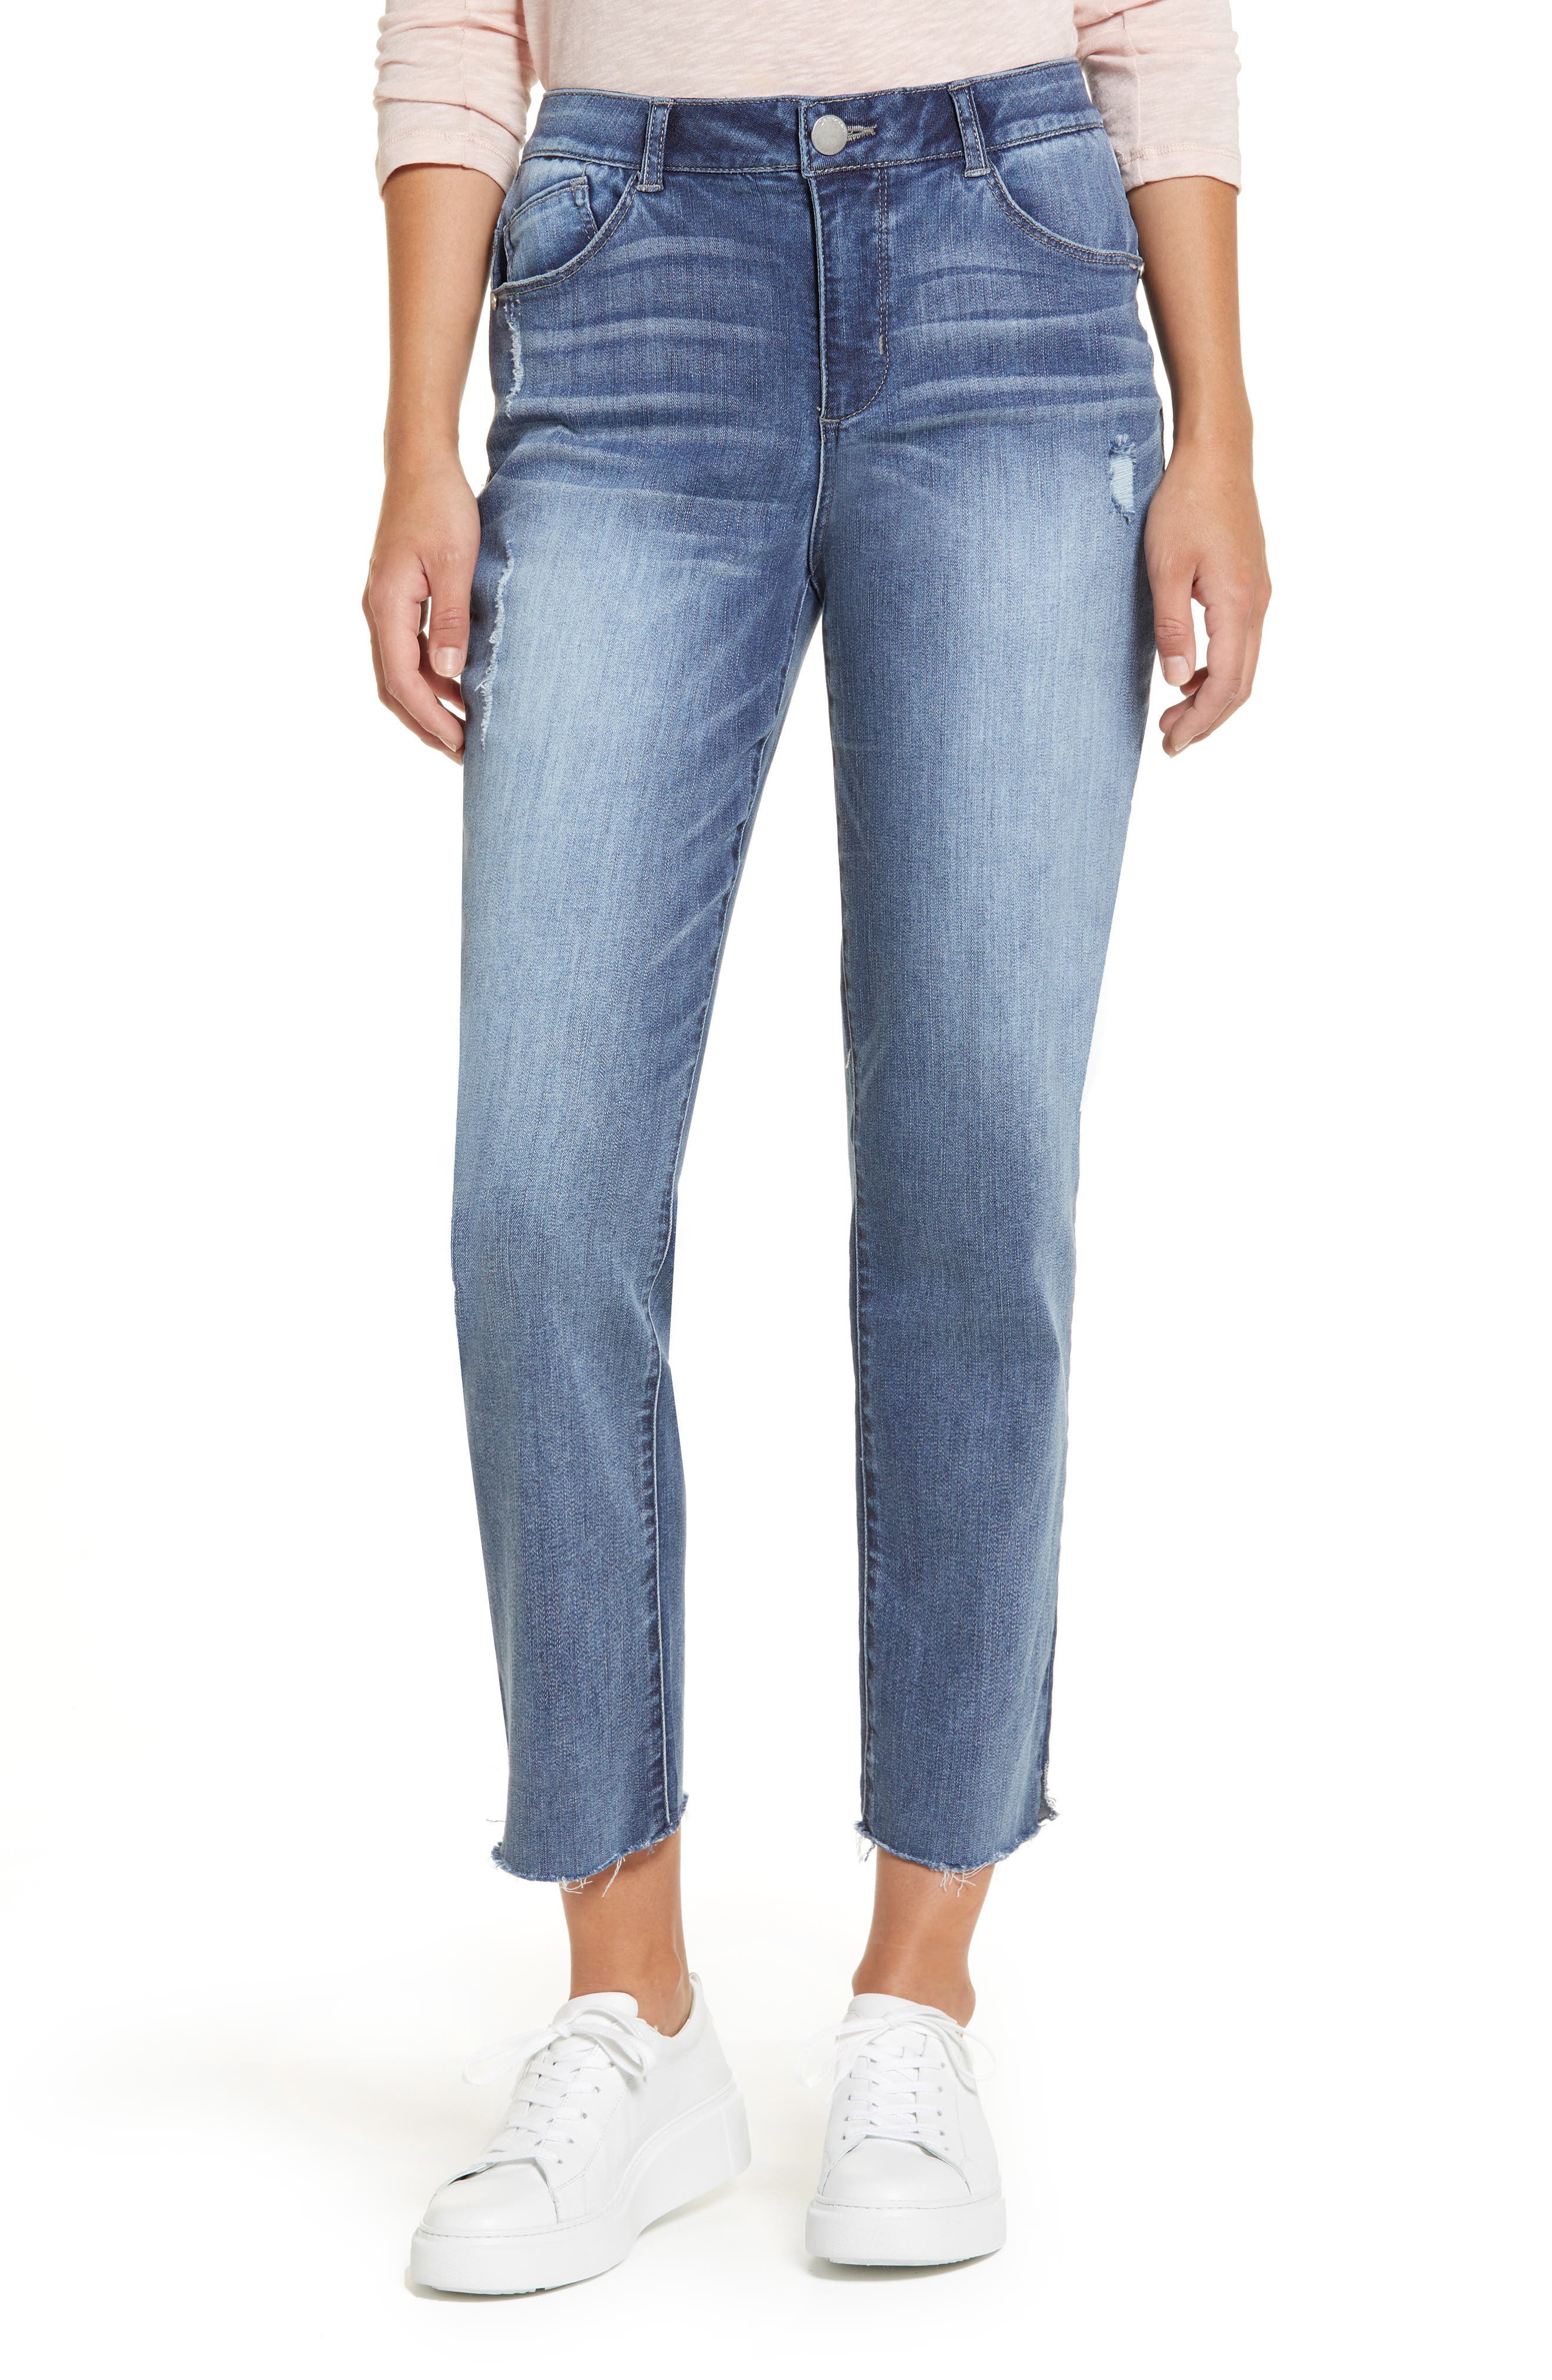 wit and wisdom high waisted jeans